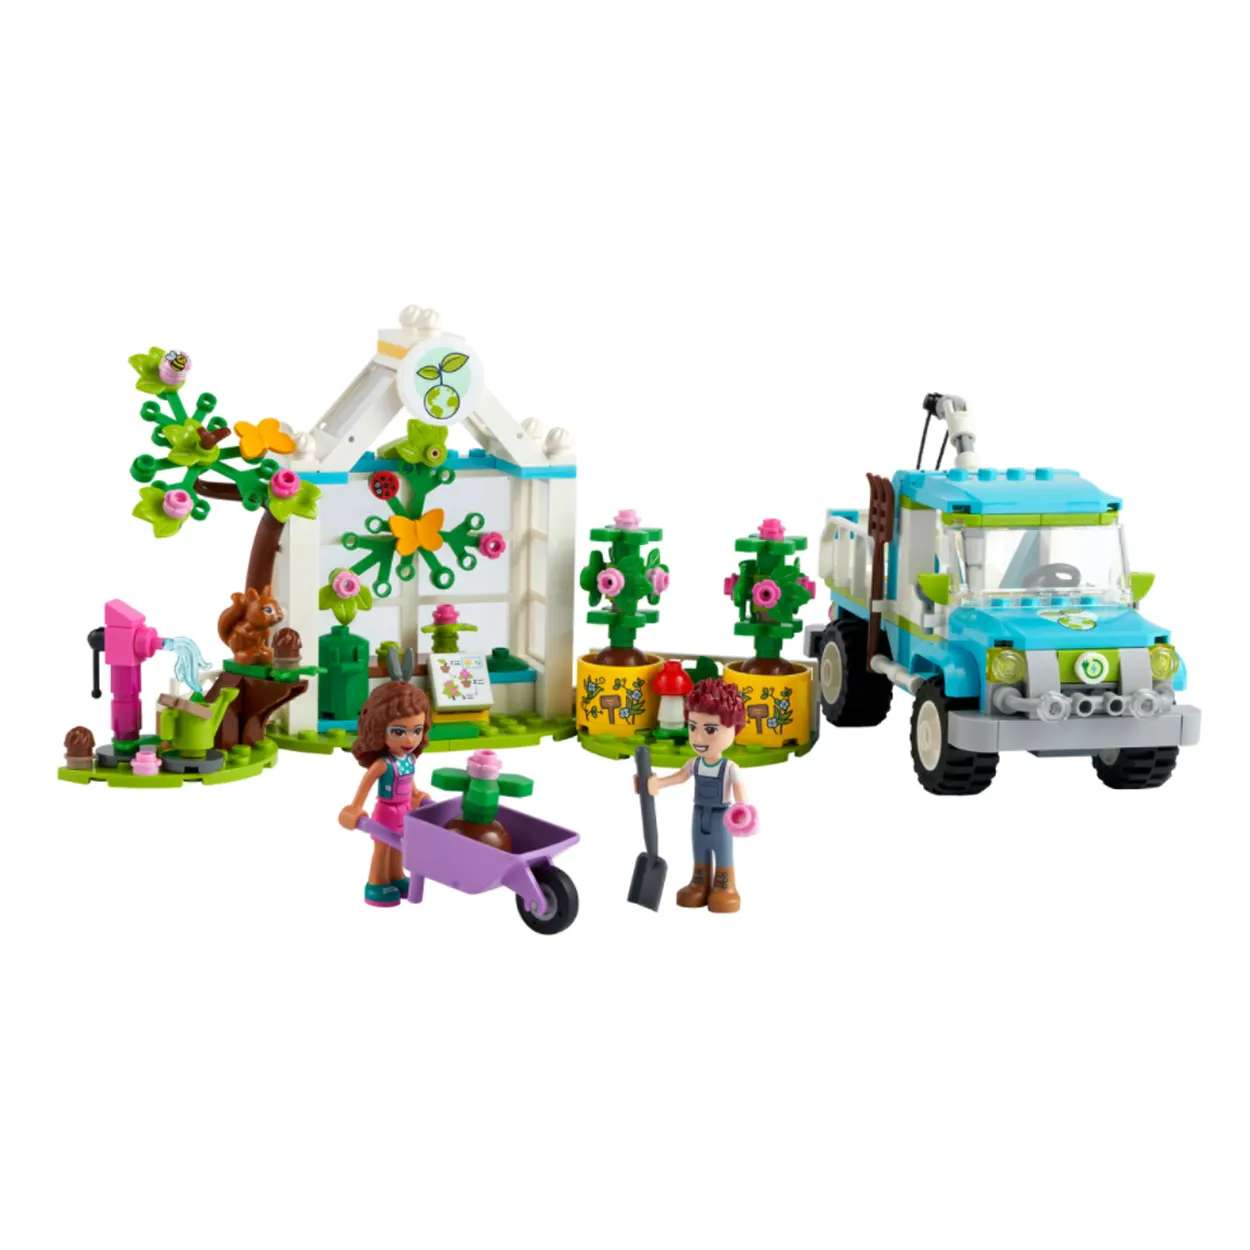 LEGO Friends New Sets for Jan. 1st 2022 Revealed | Big Apartment, House Boat and more